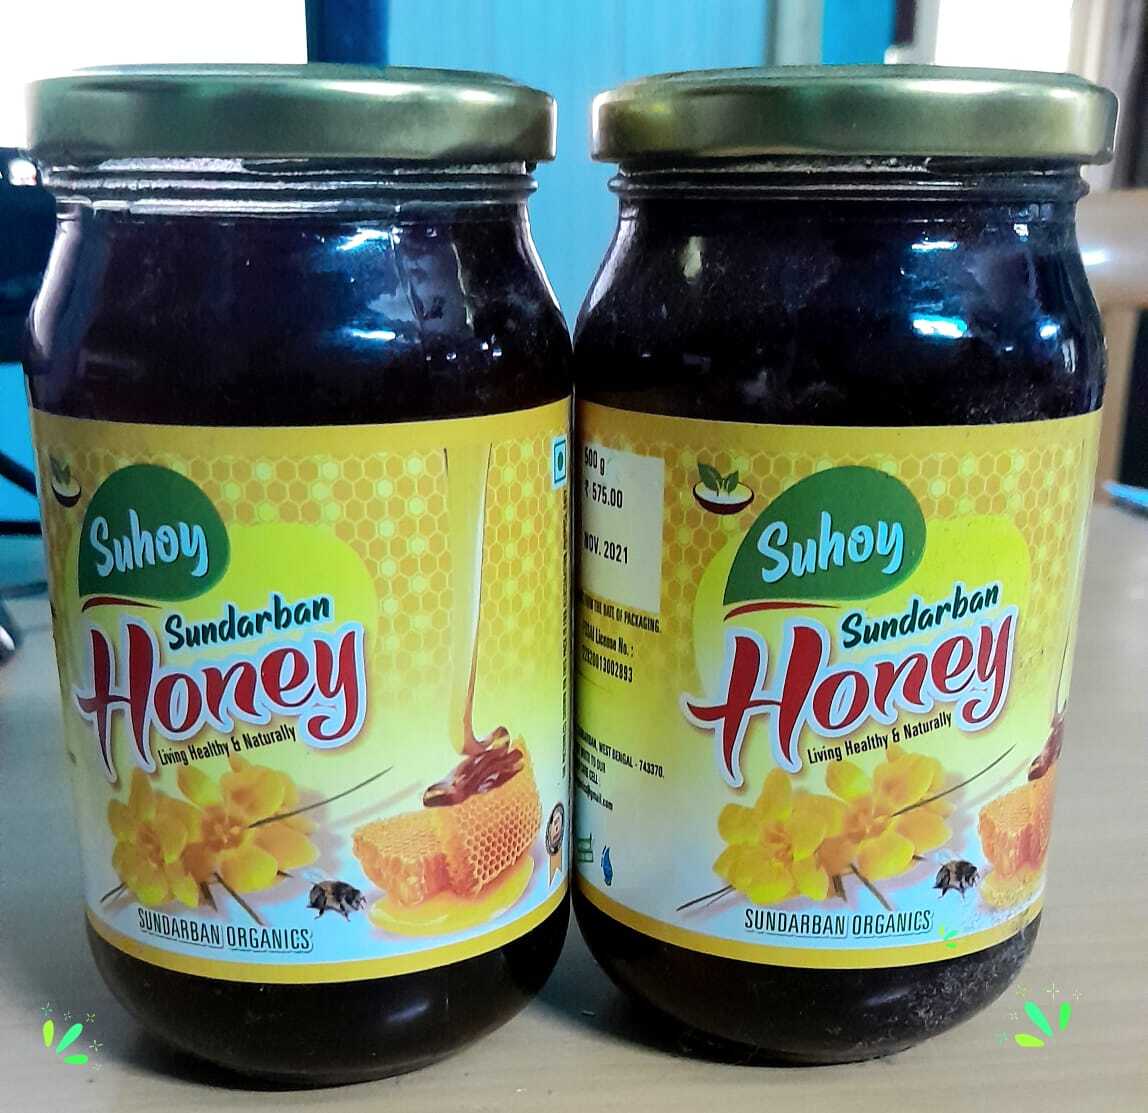 Pure Honey is wellness booster